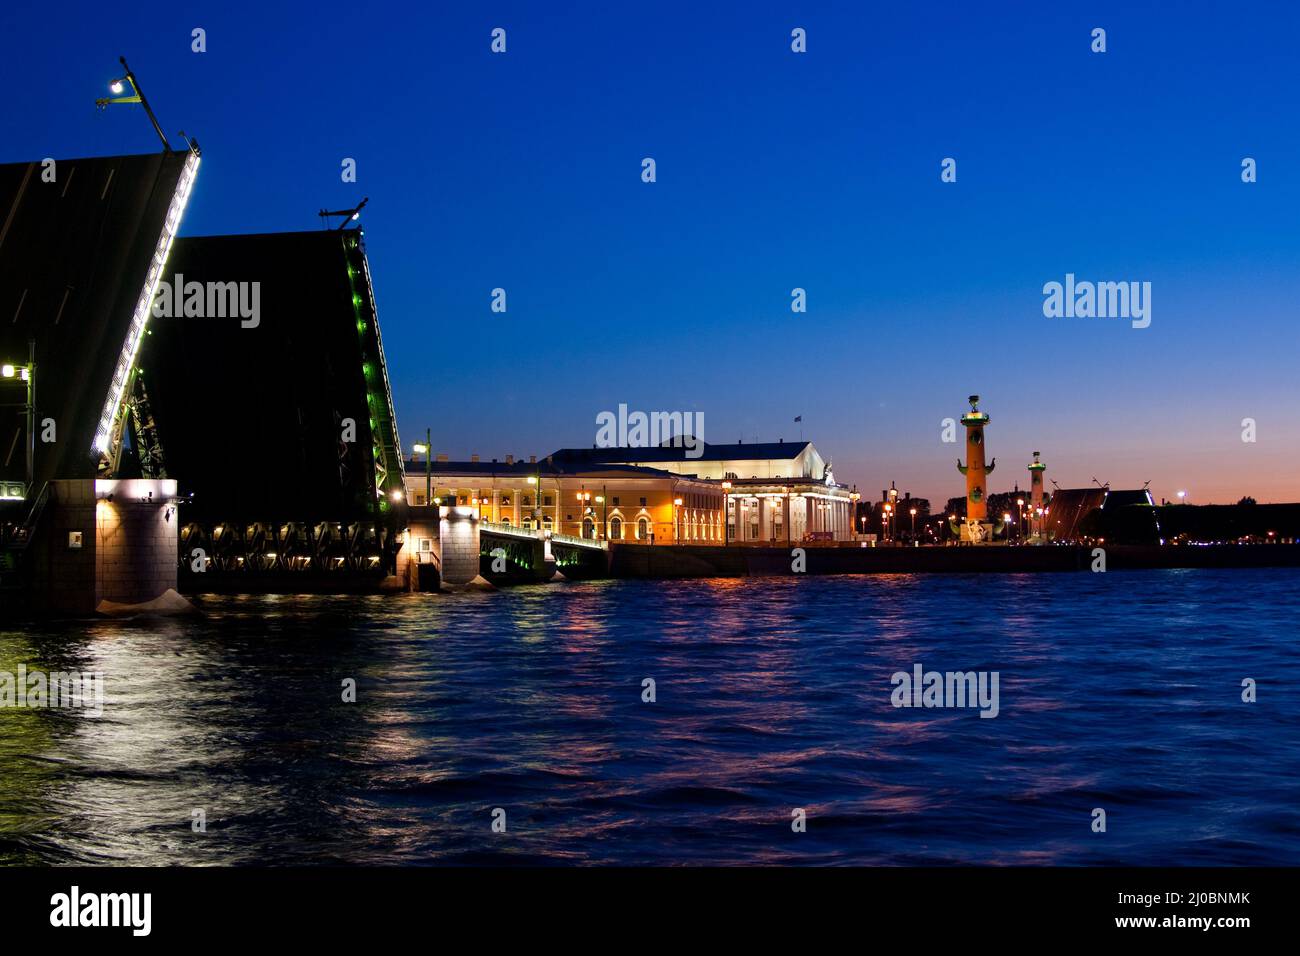 Divorced Palace Bridge during the White Nights , St. Petersburg, Russia. July 3, 2010 Stock Photo